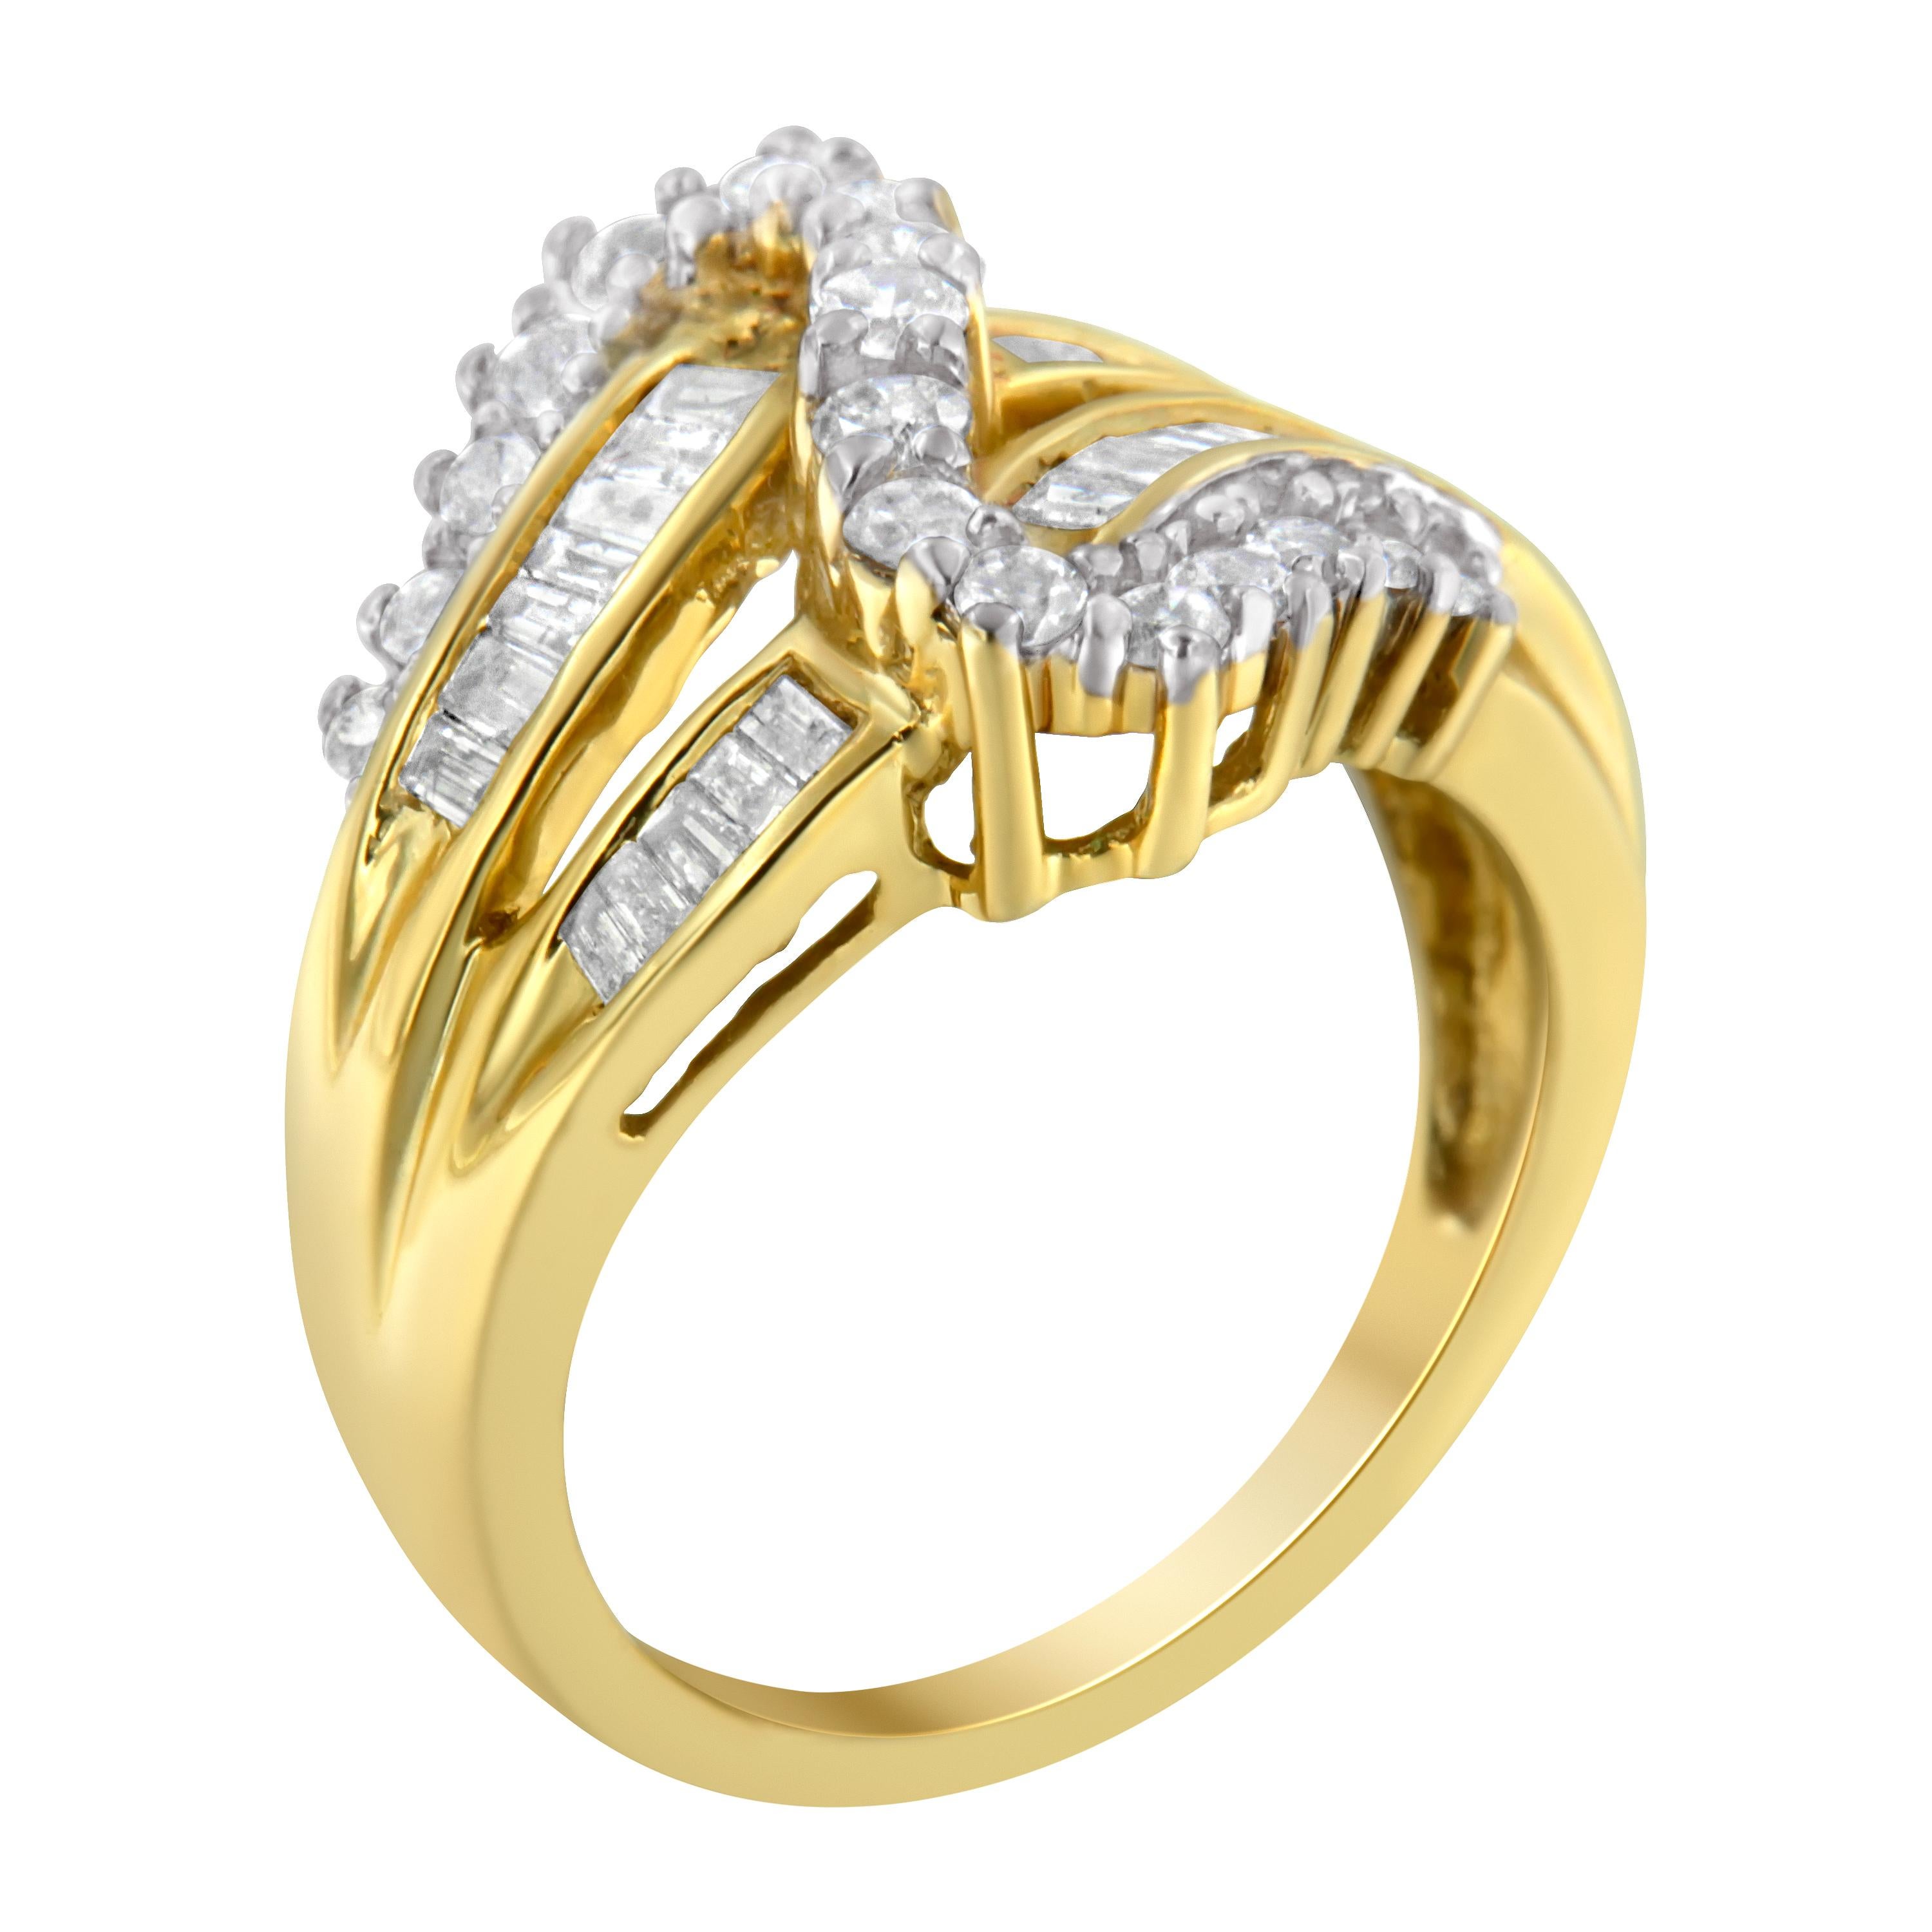 For Sale:  10K Yellow Gold 1.0 Carat Round and Baguette Cut Diamond Bypass Ring 4